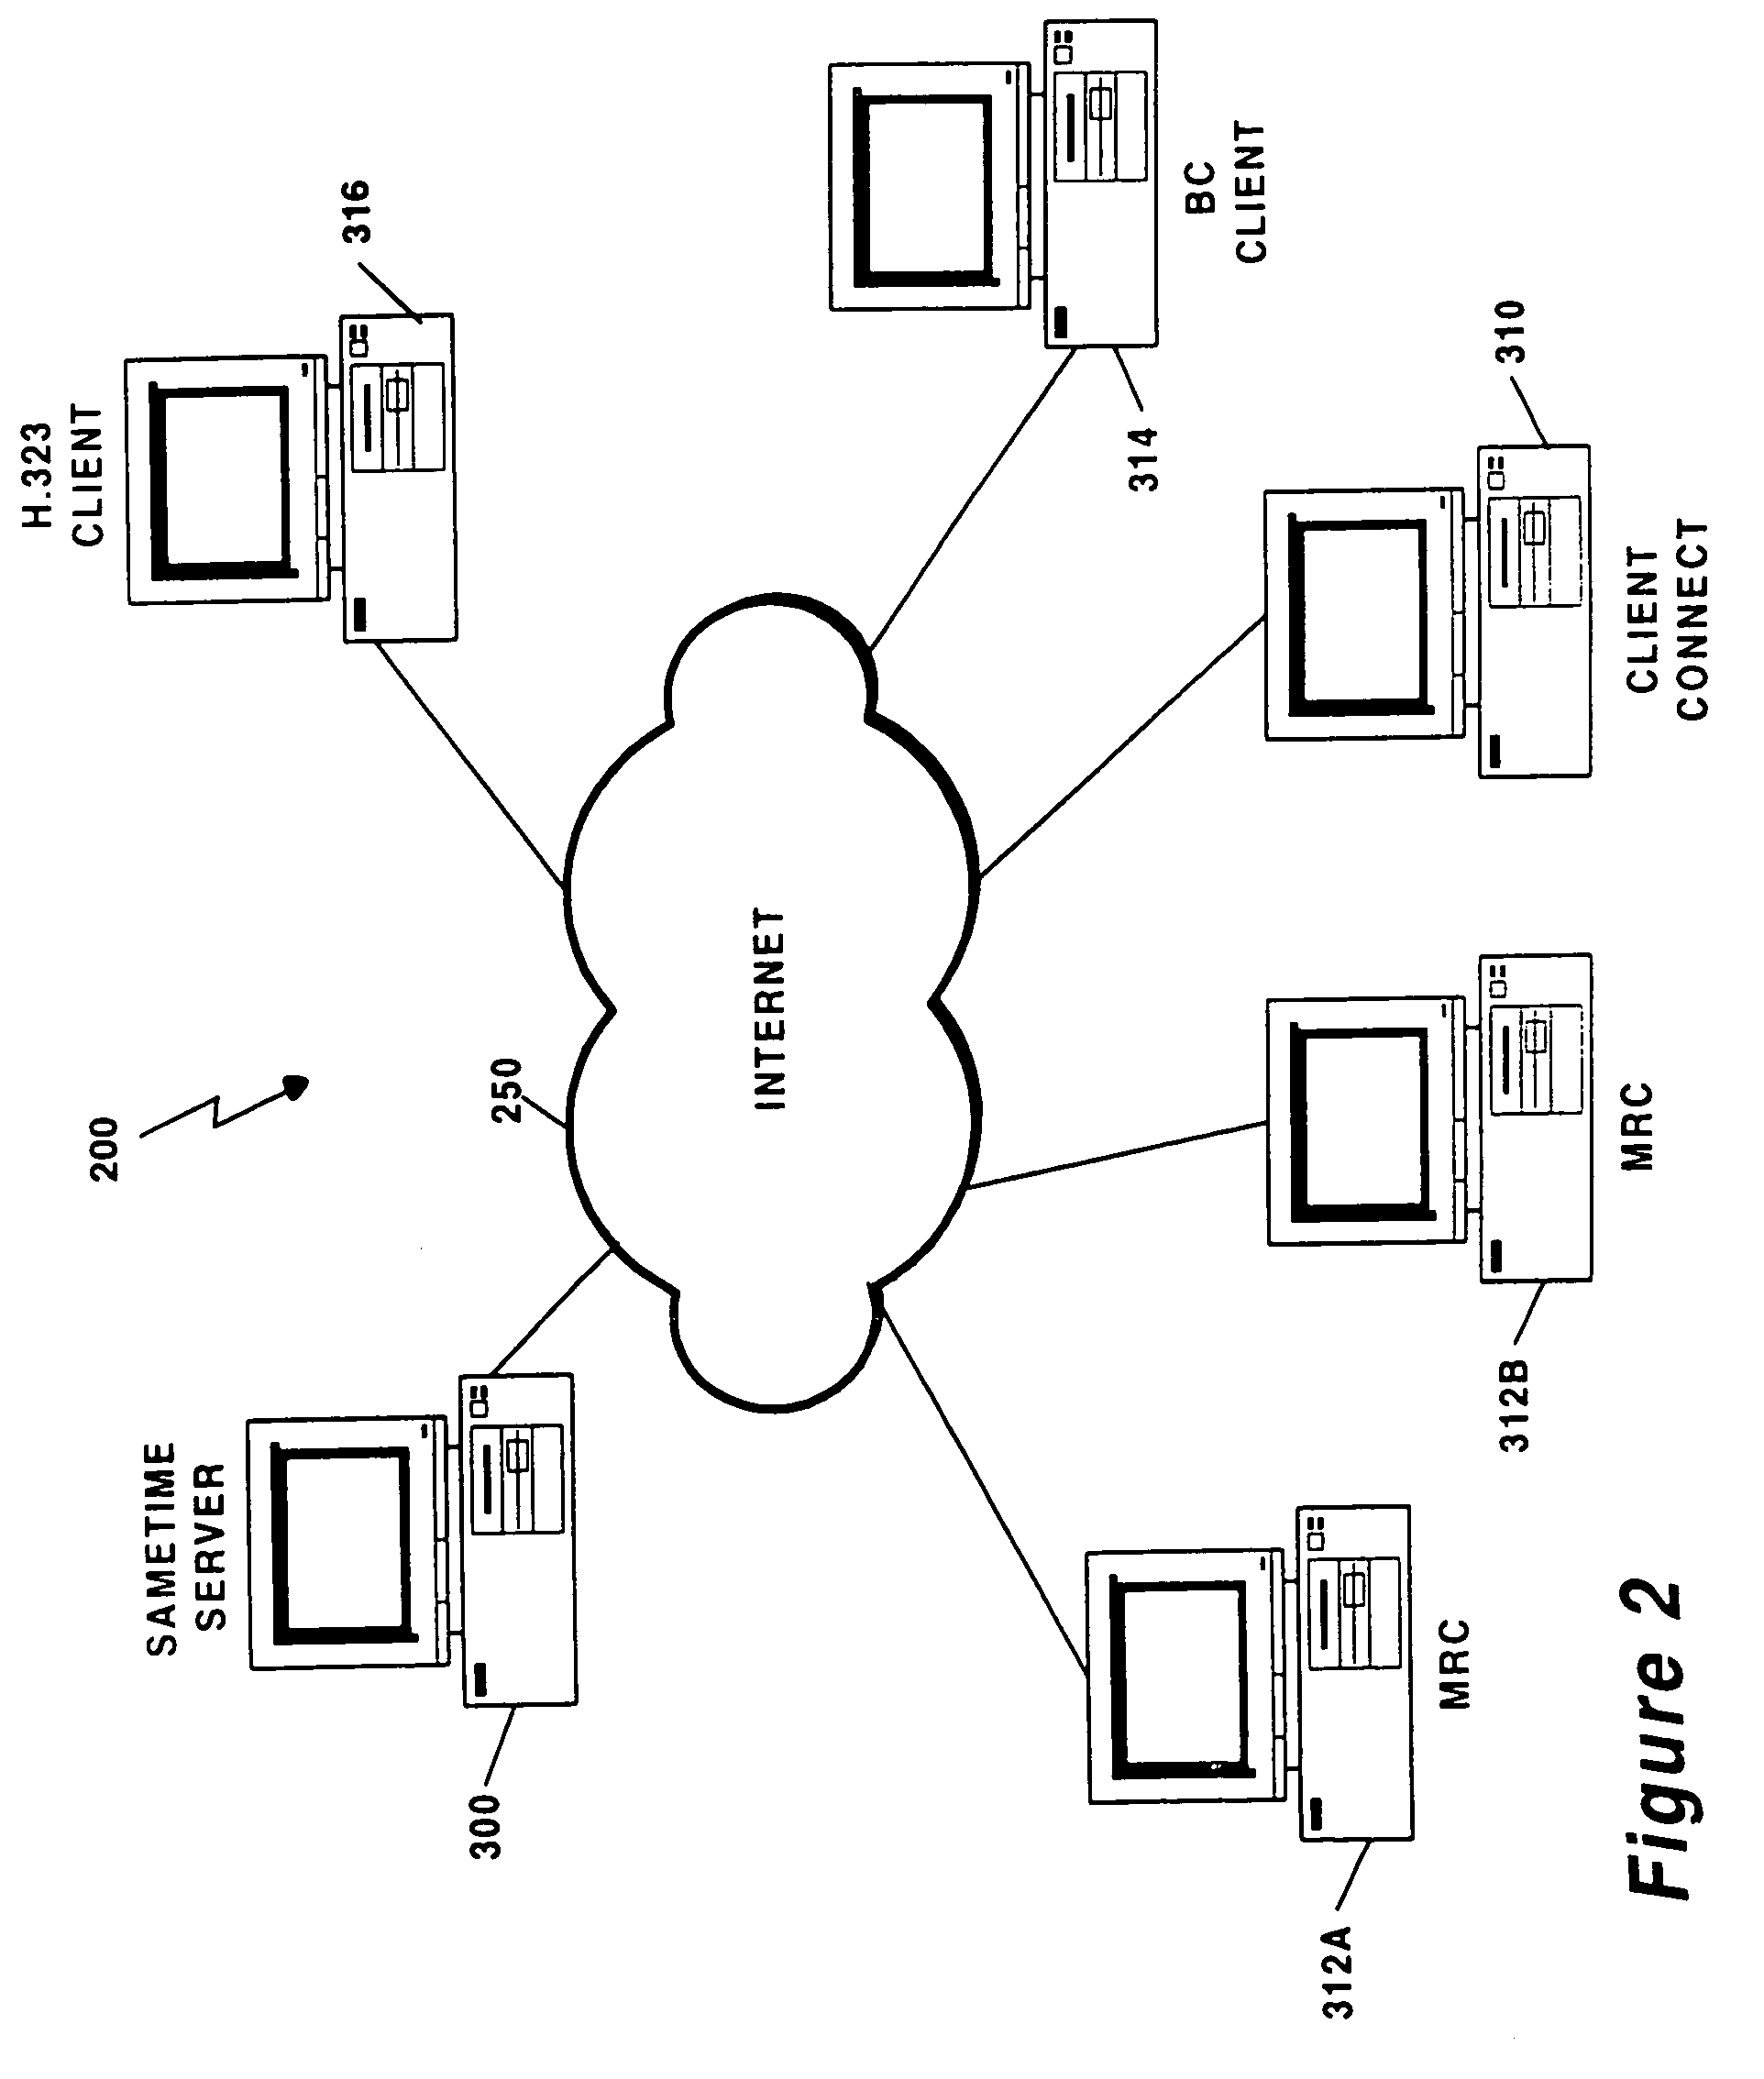 Method and apparatus for providing full duplex and multipoint IP audio streaming